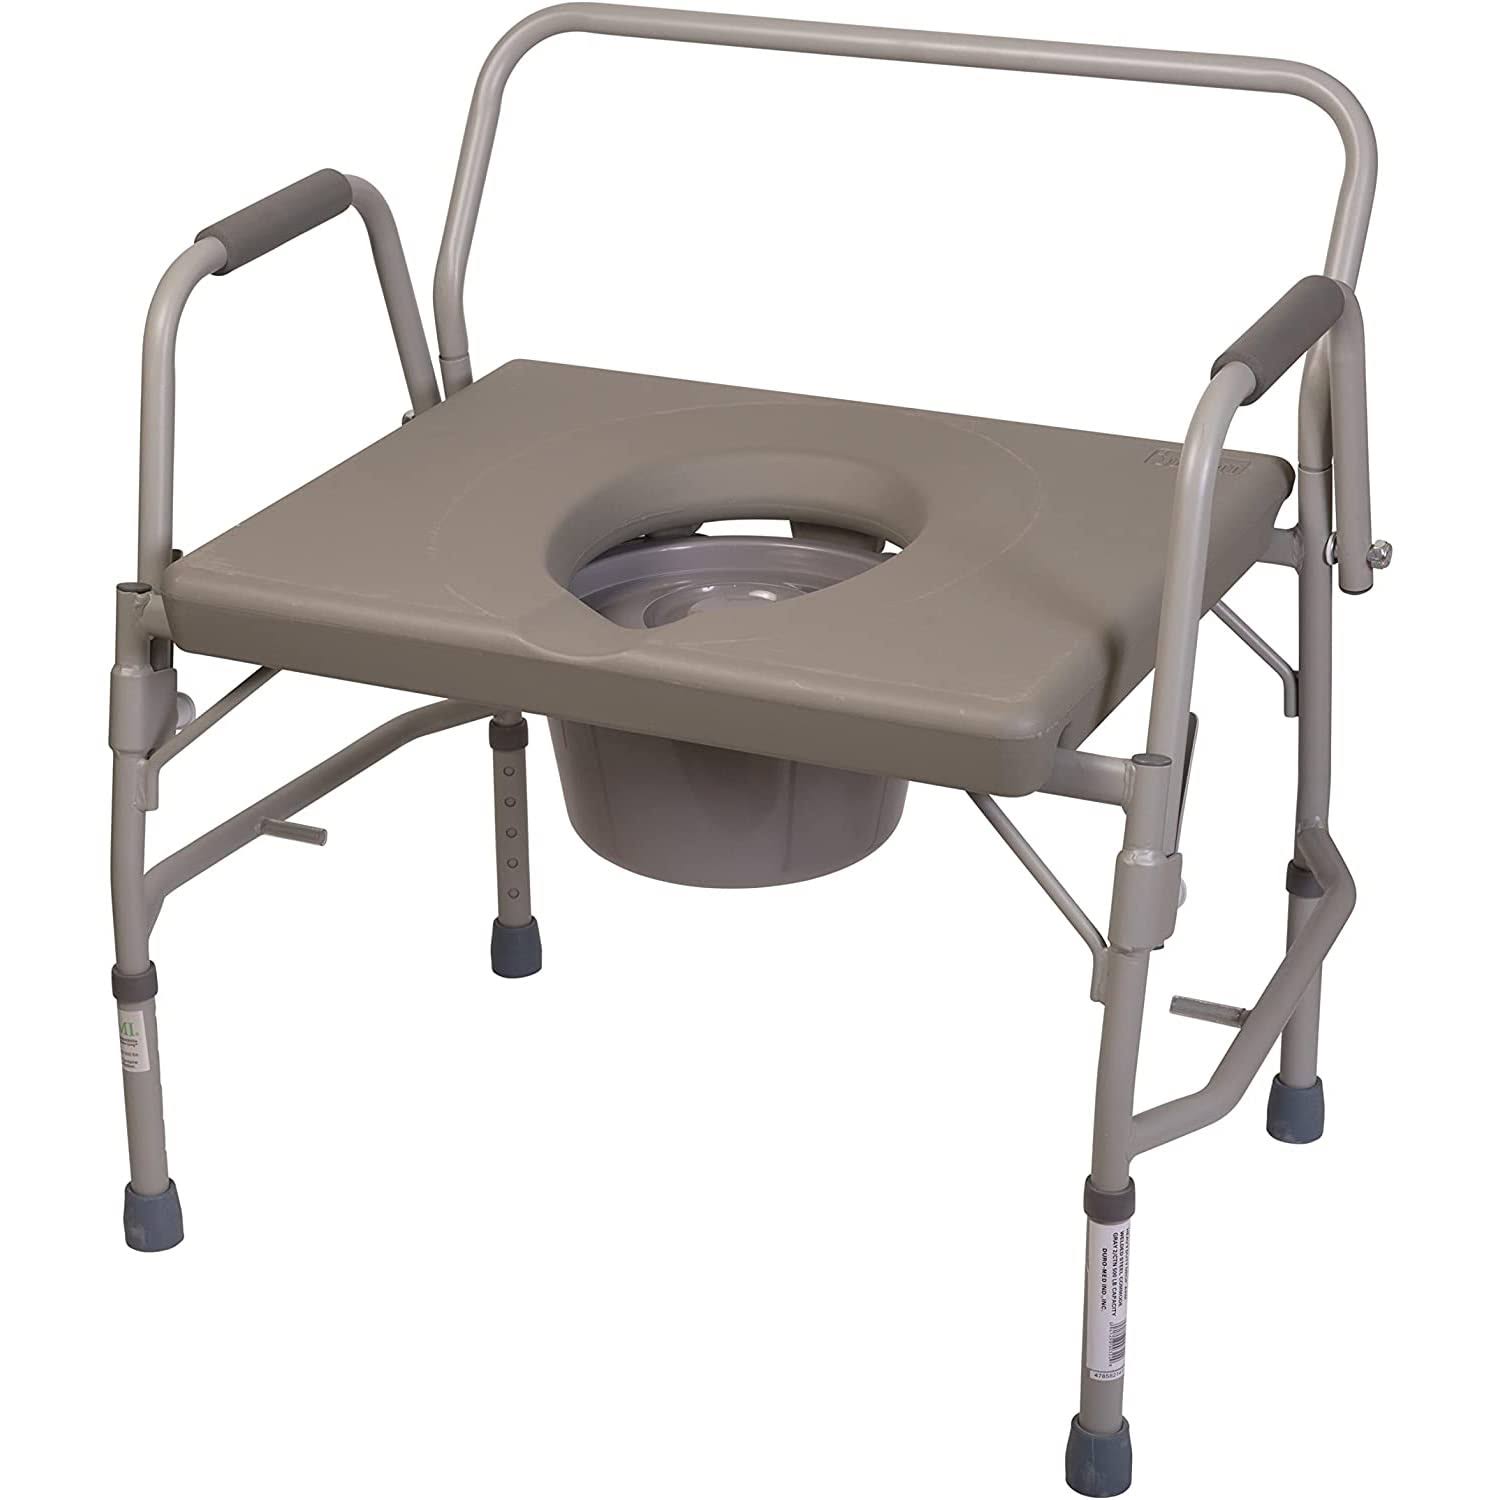 DMI Bariatric Bedside Commode, Extra Wide, Drop Arm, Adjustable, Gray